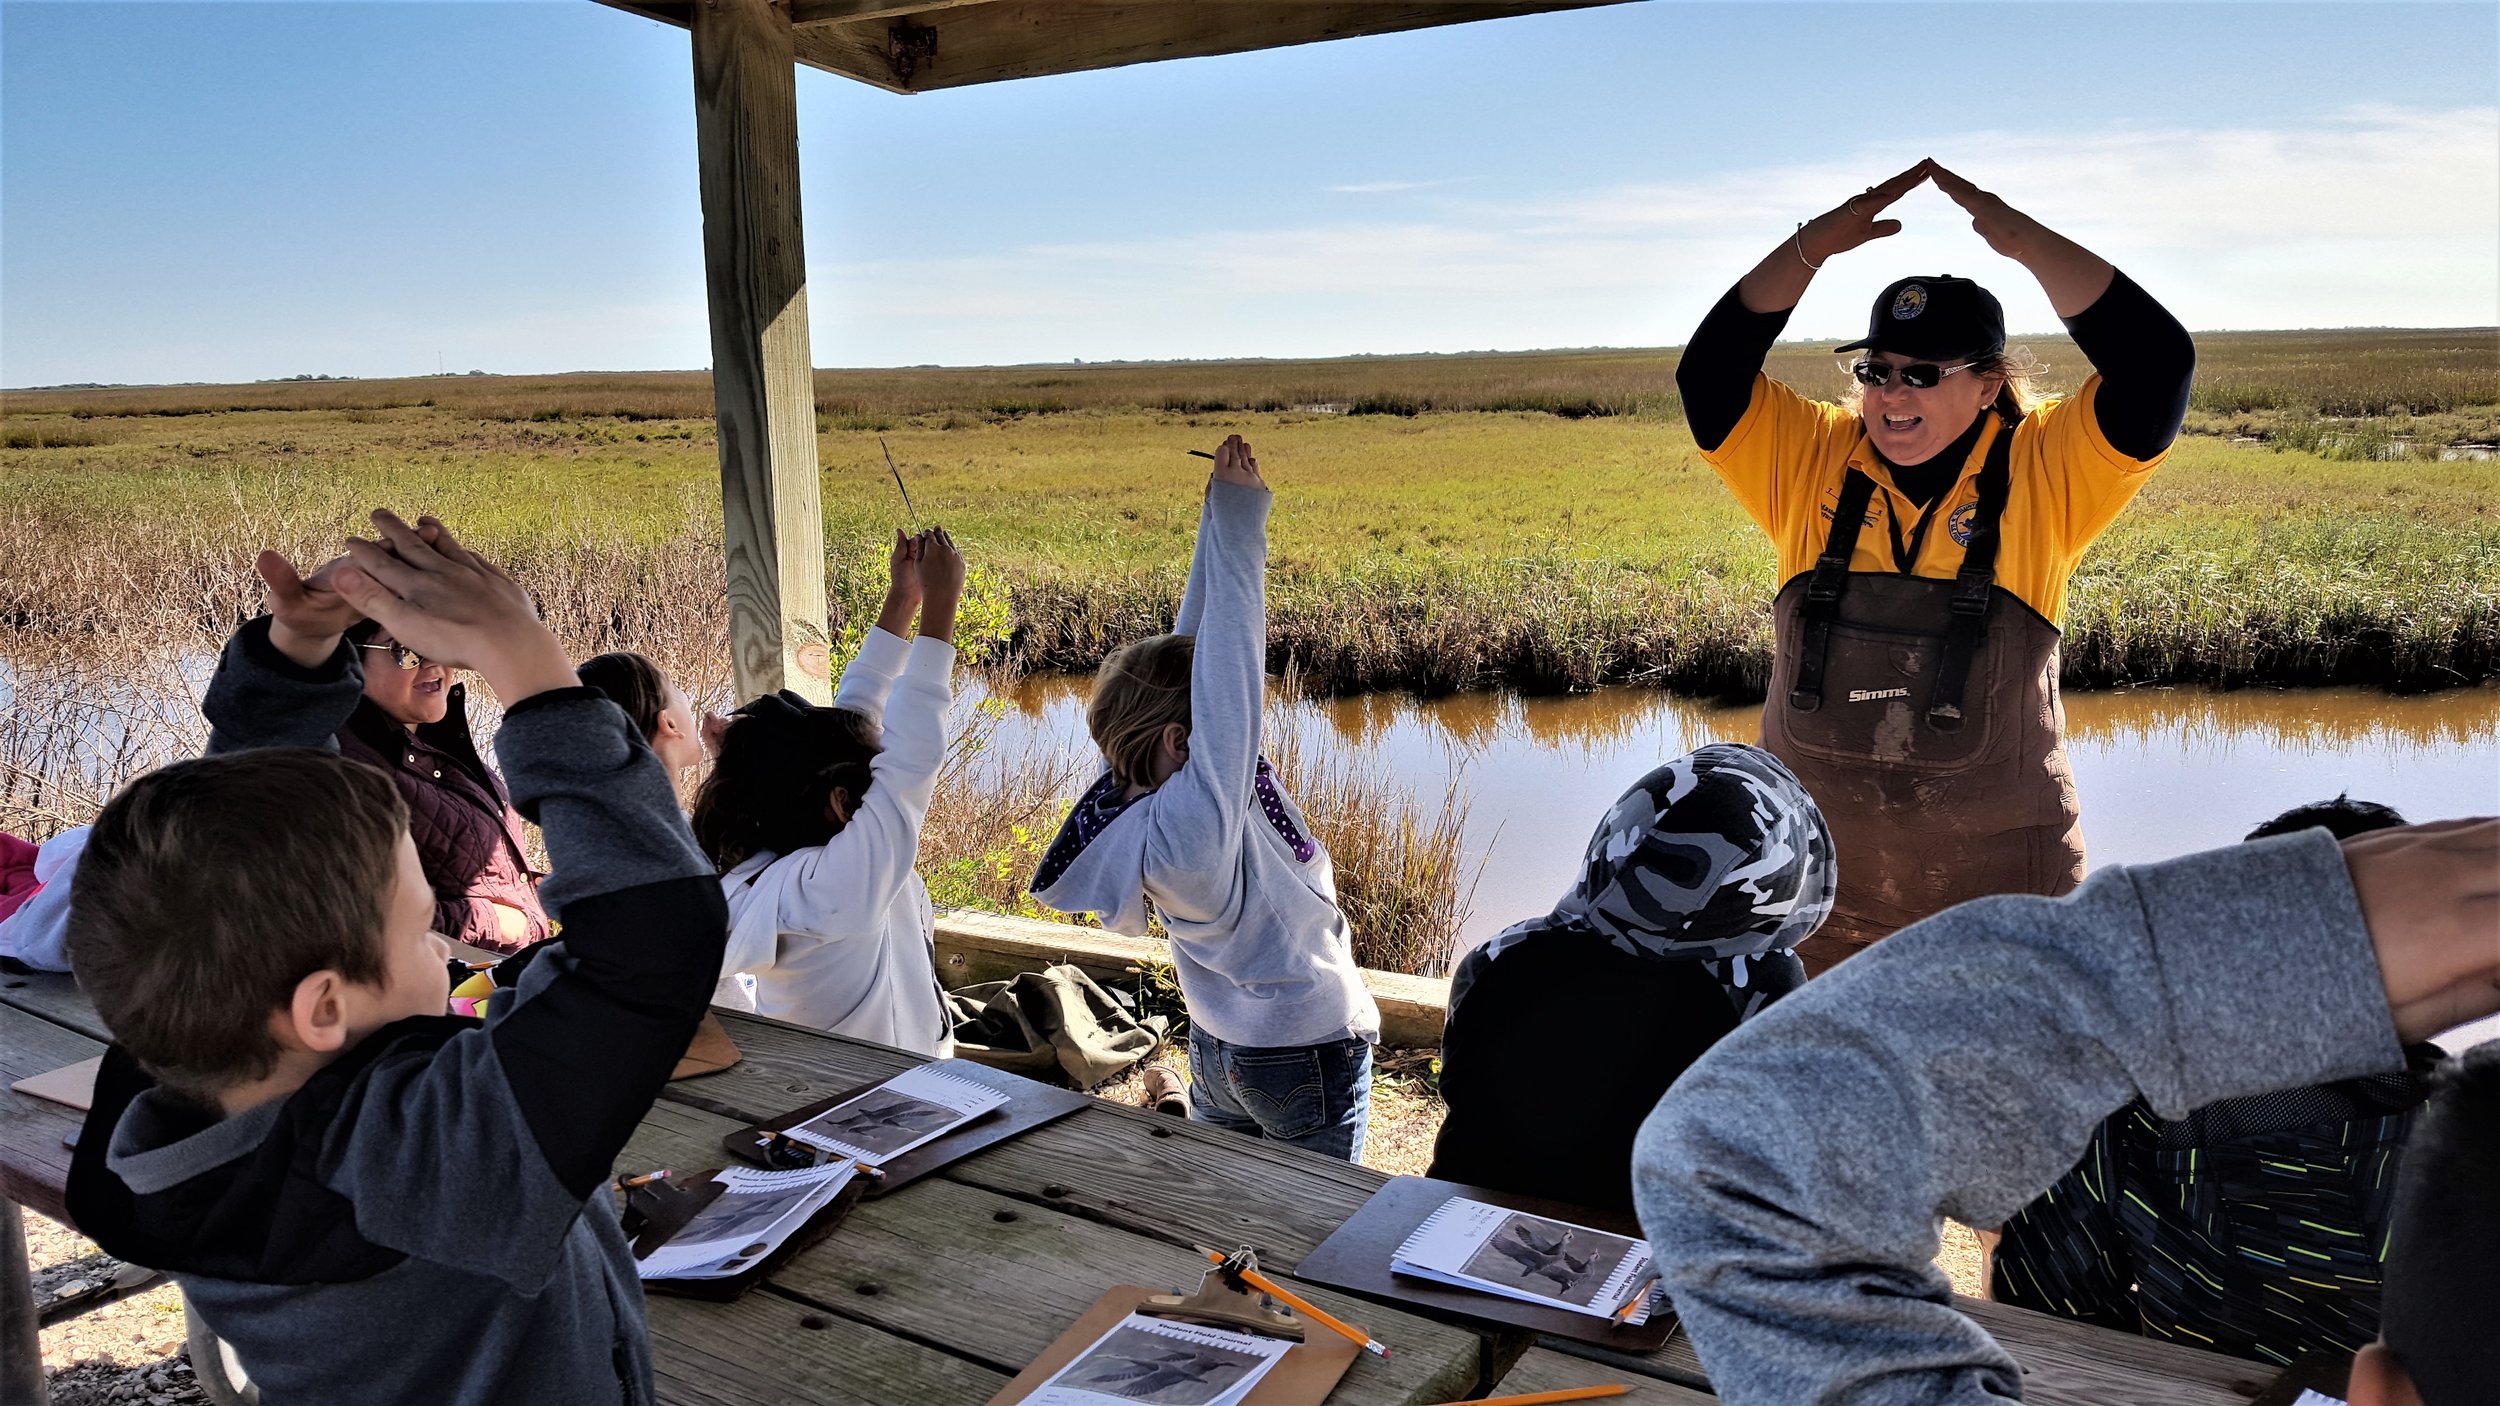 “Active learning” with a new twist as students use their arms to spell E S T U A R Y before using a seine net to capture crabs, shrimp, and fish | Marty Cornell